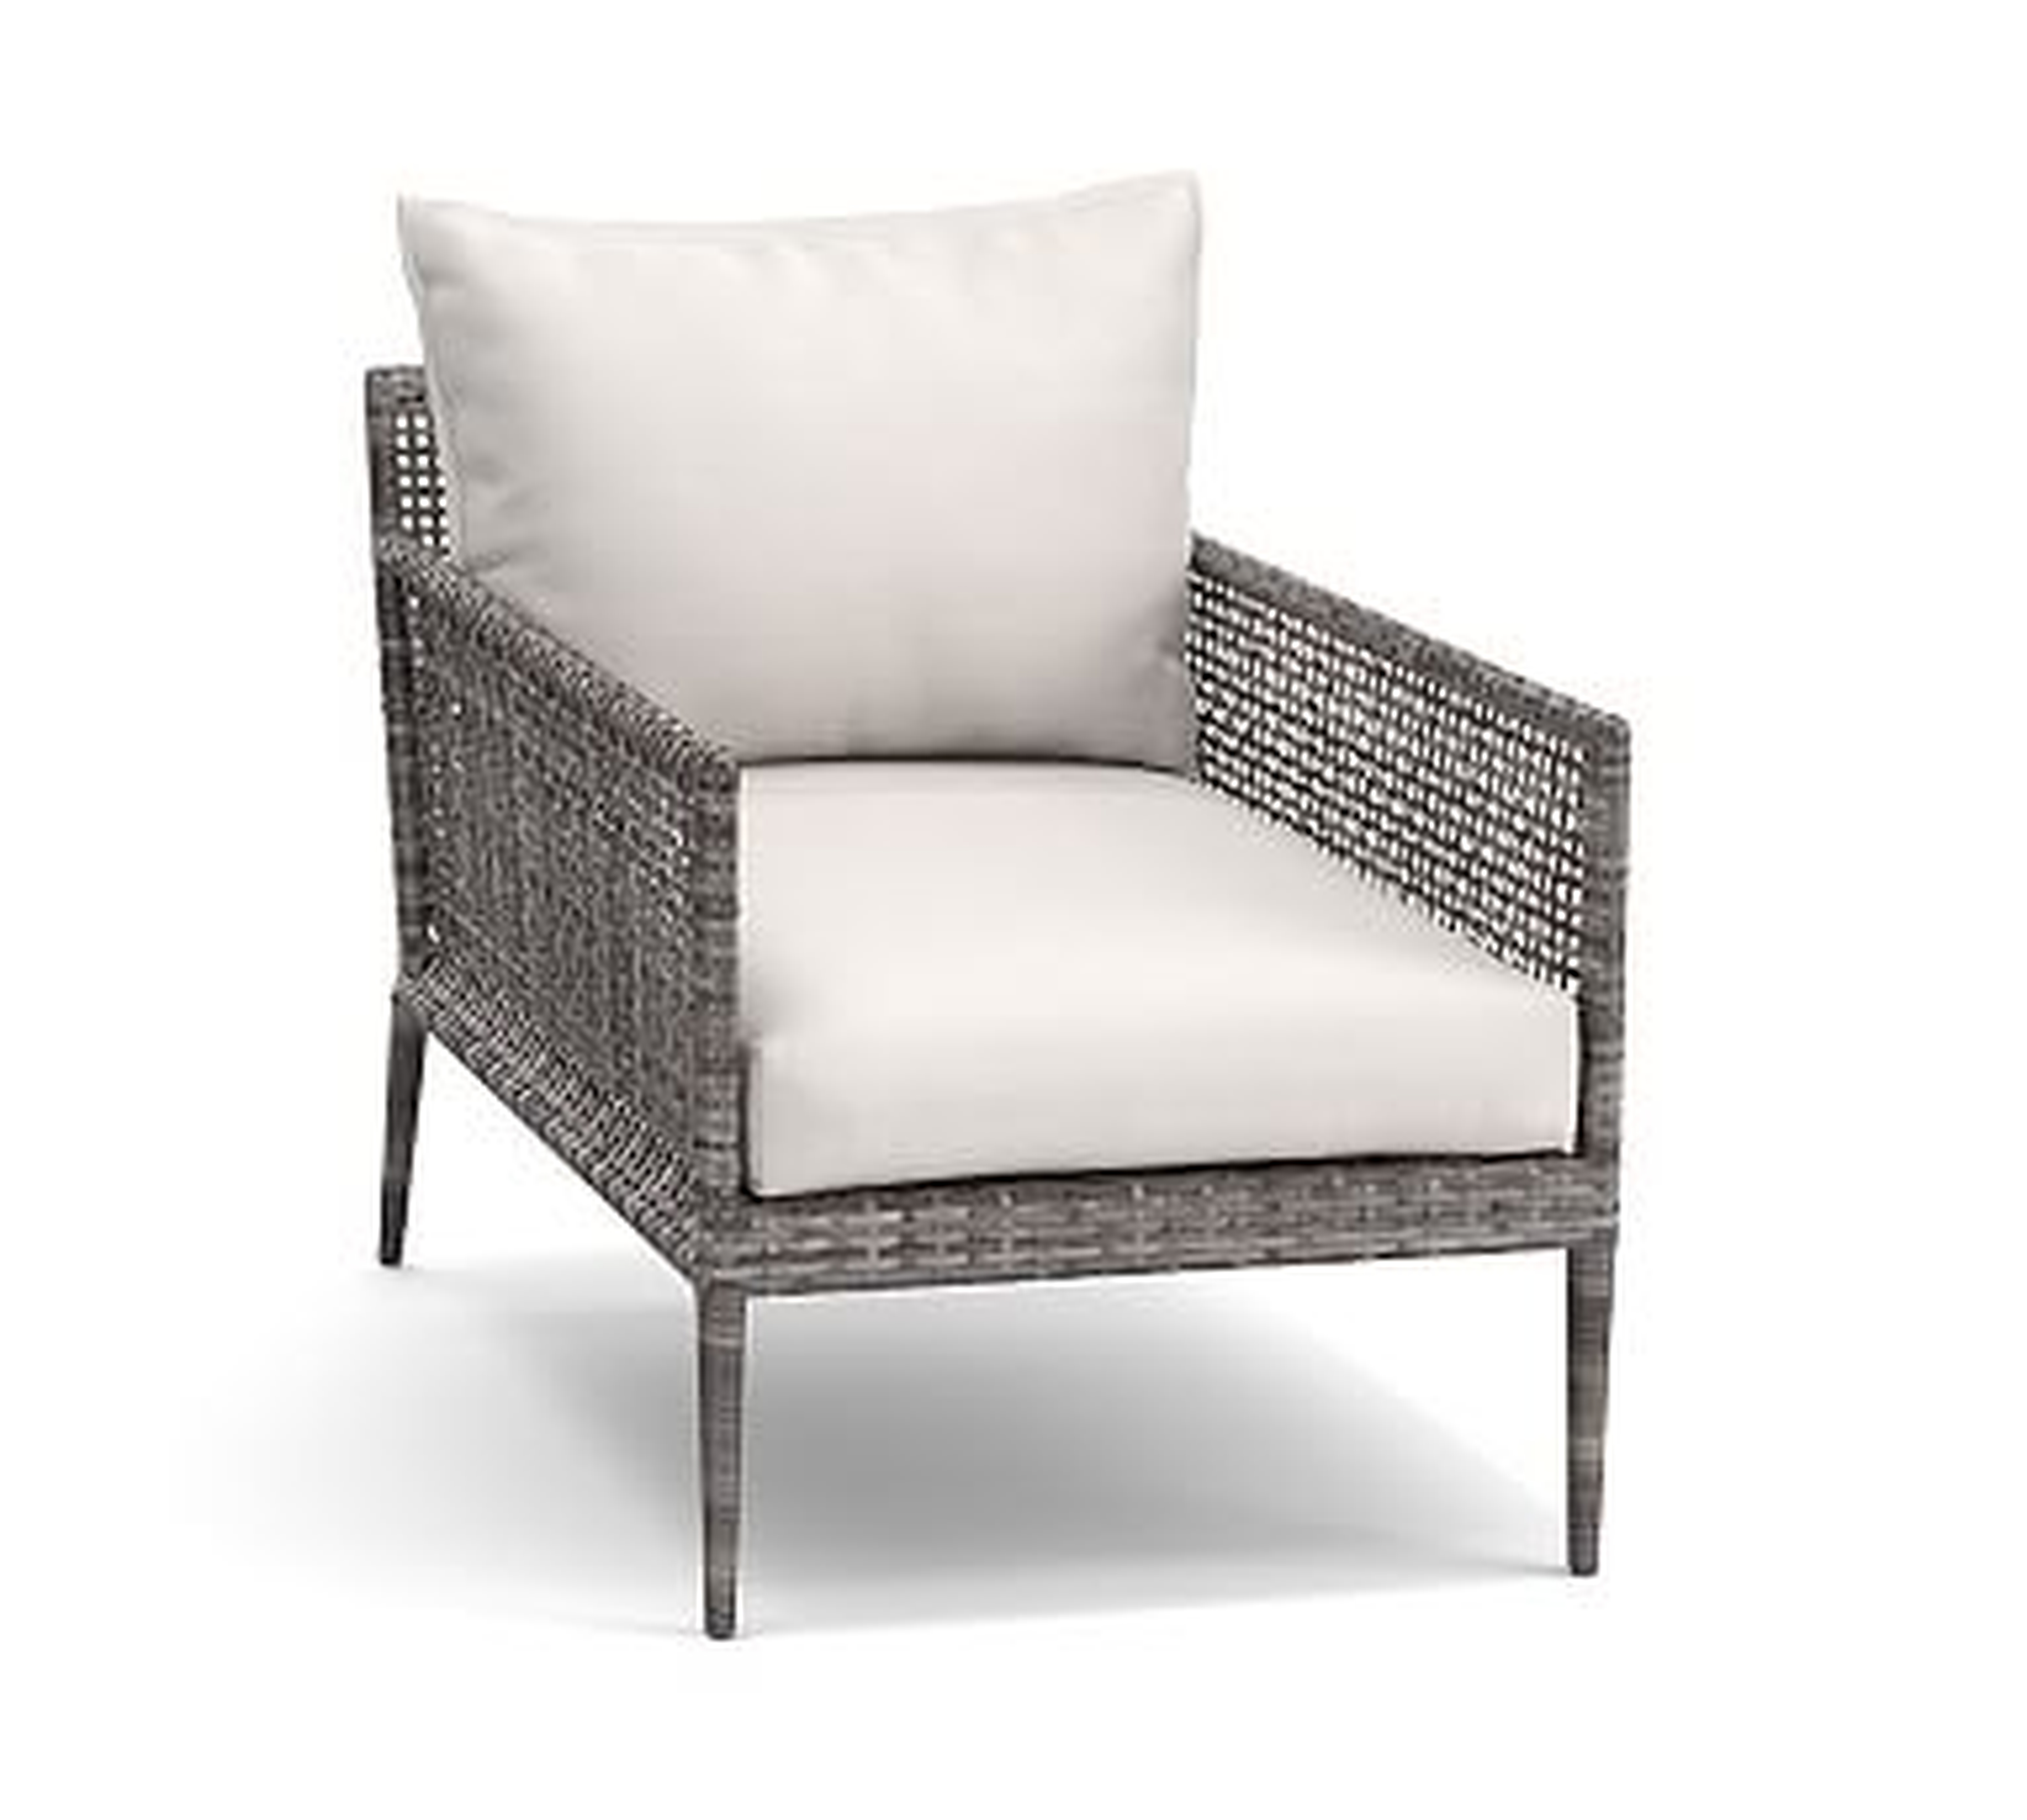 Cammeray All-Weather Wicker Lounge Chair with Cushion, Gray - Pottery Barn